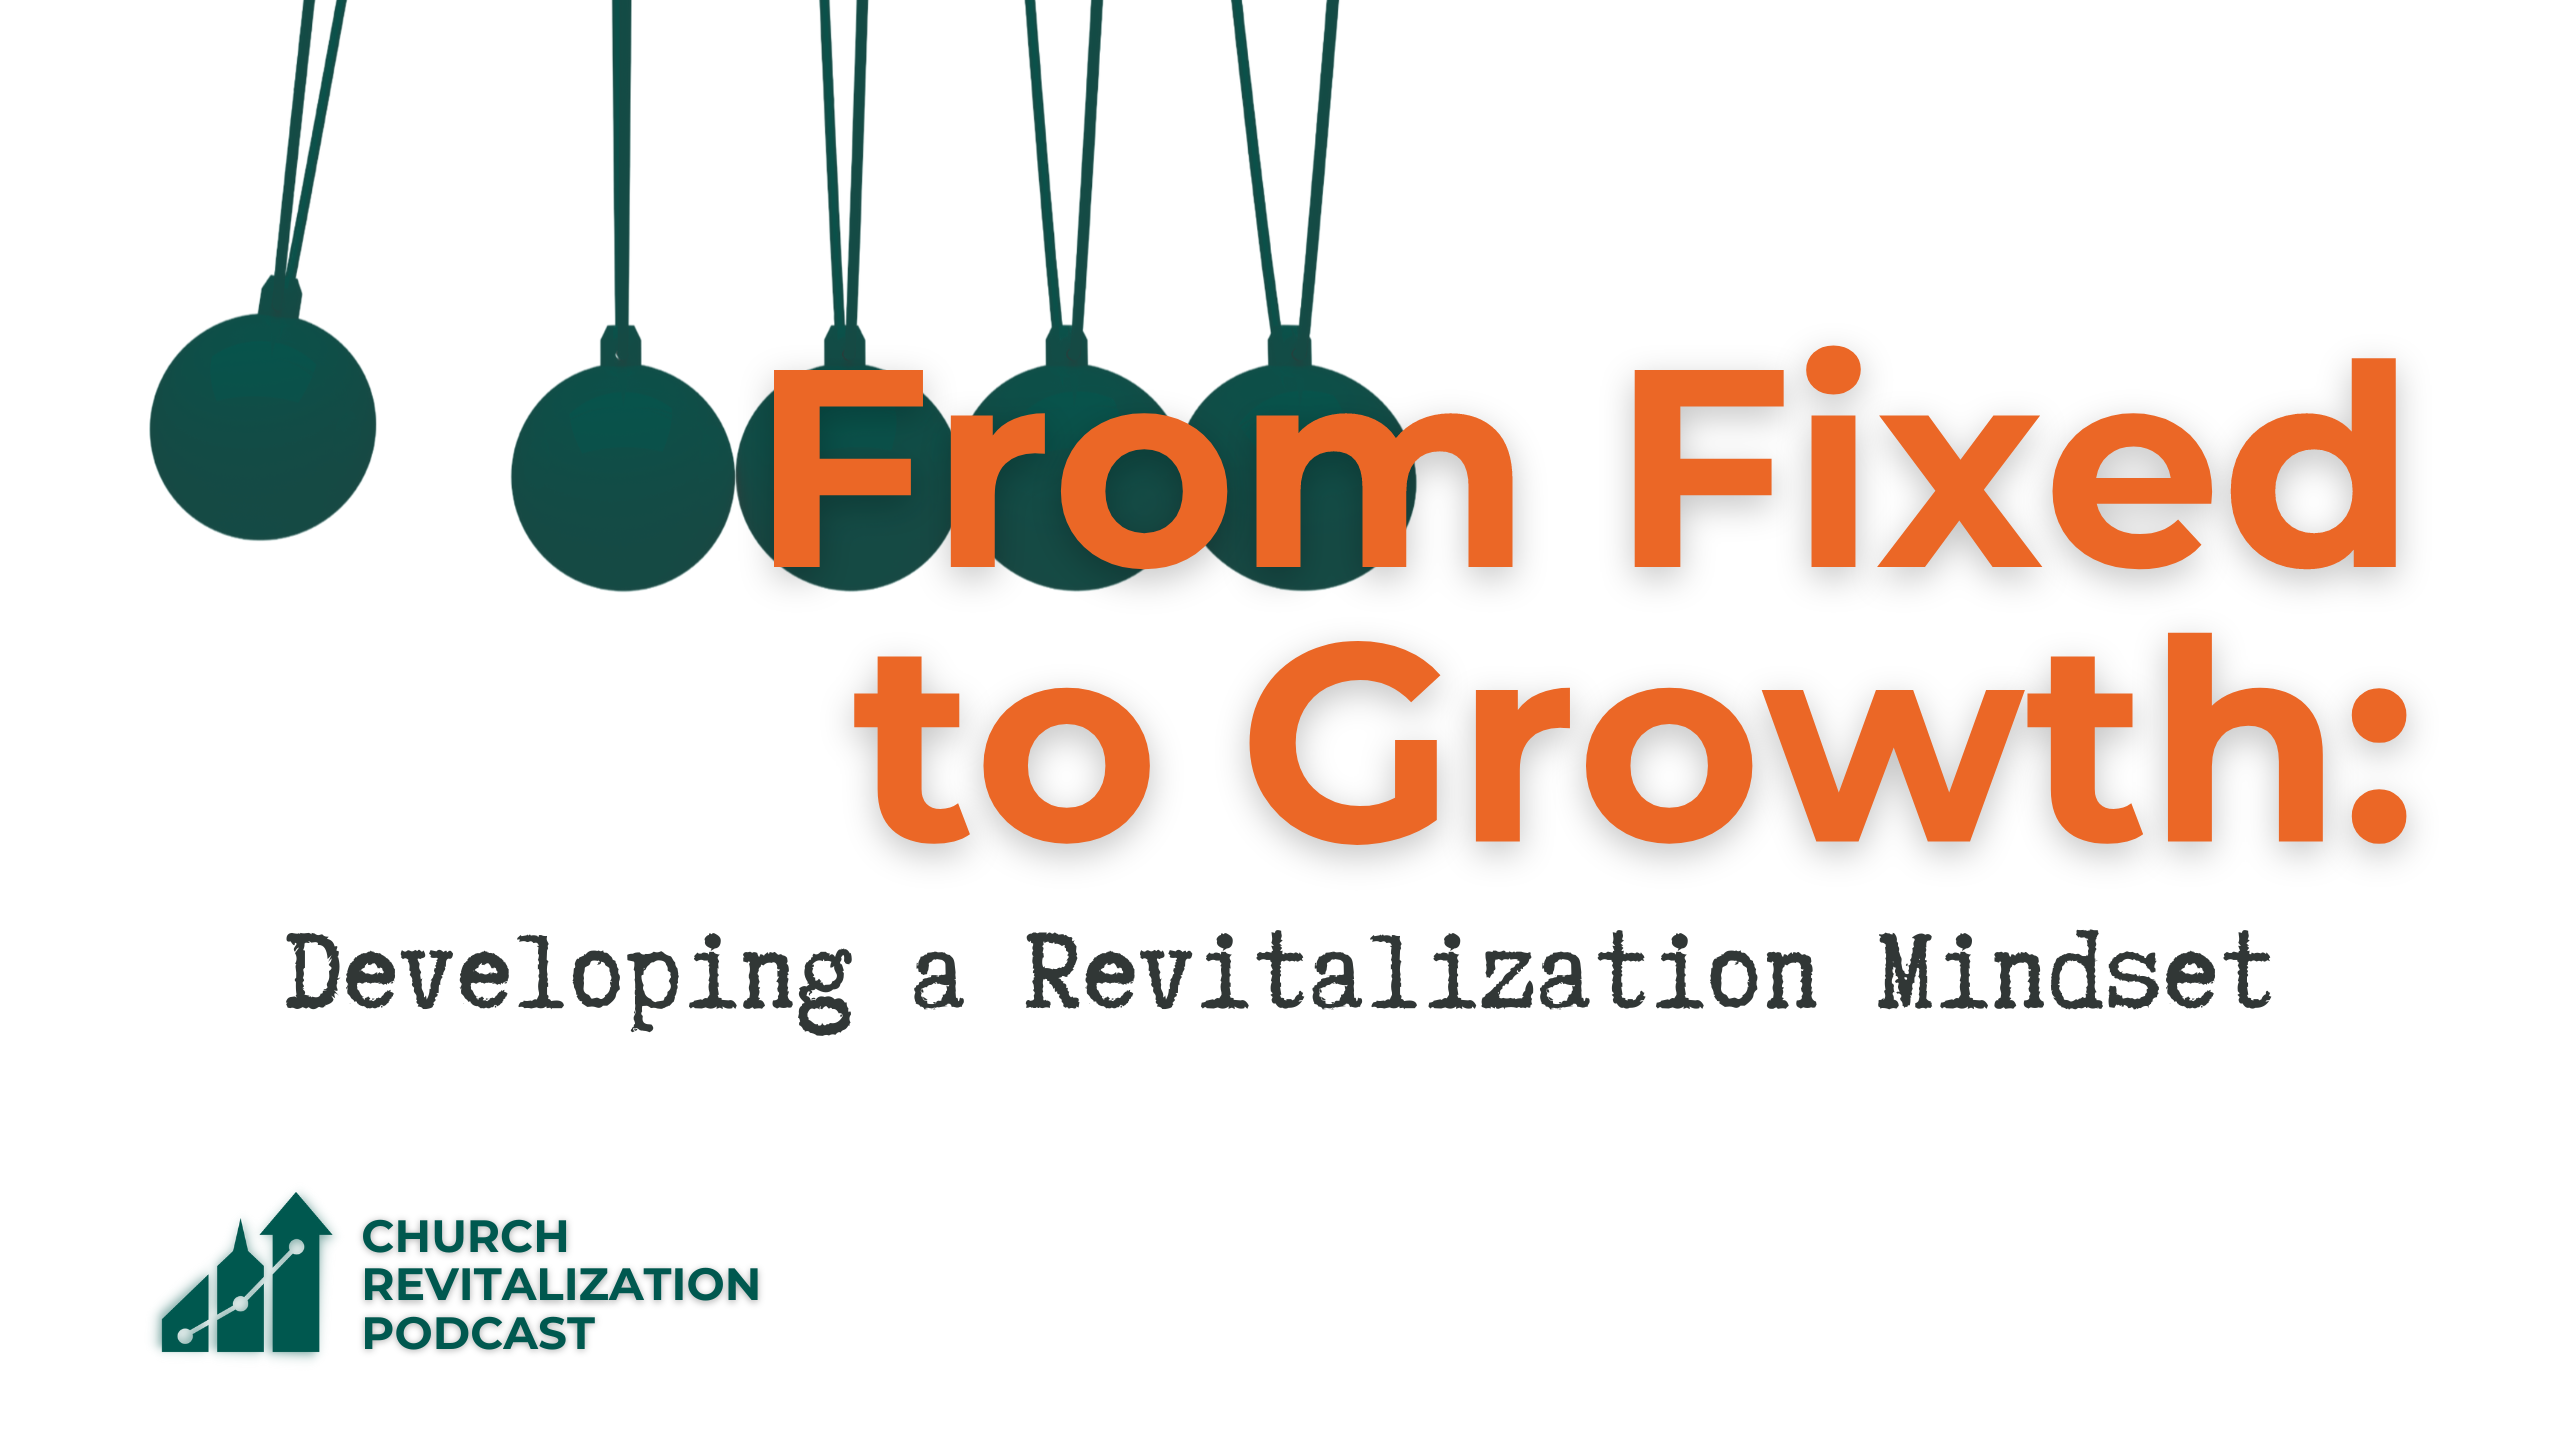 From Fixed to Growth: Developing a Revitalization Mindset